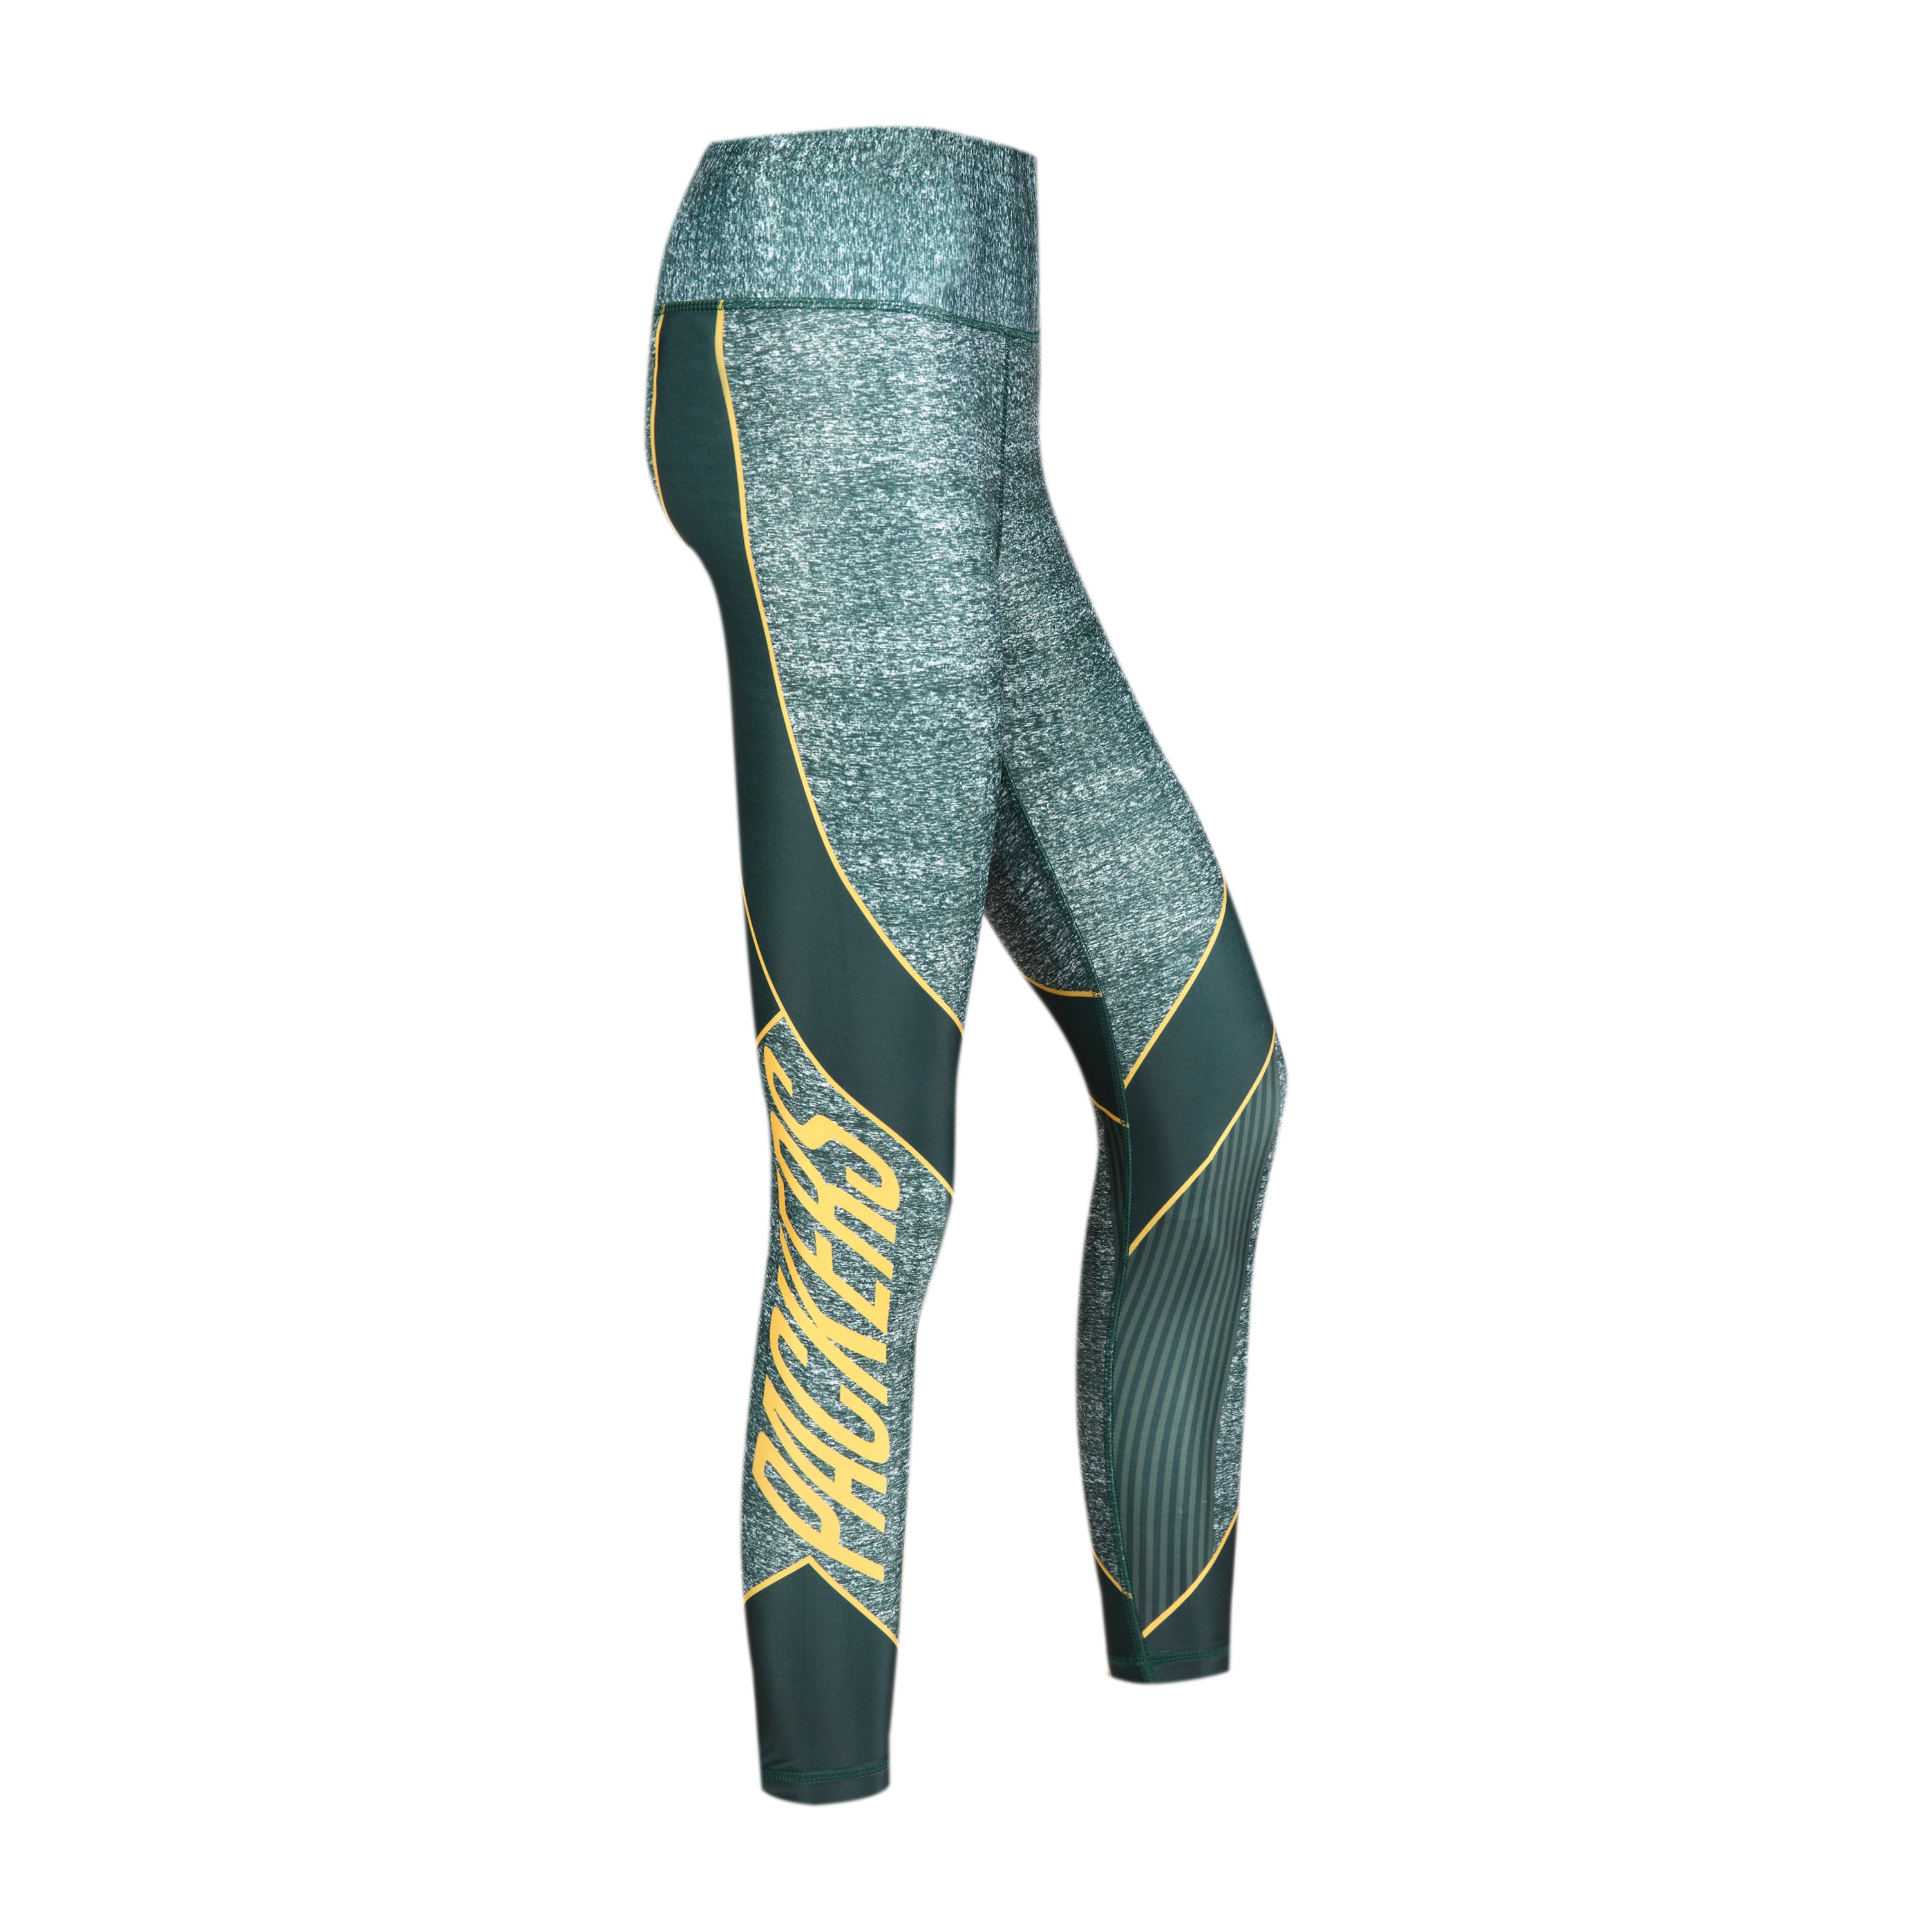 Green Bay Packers Infuse Knit Sublimated Leggings – Green Bay Stuff